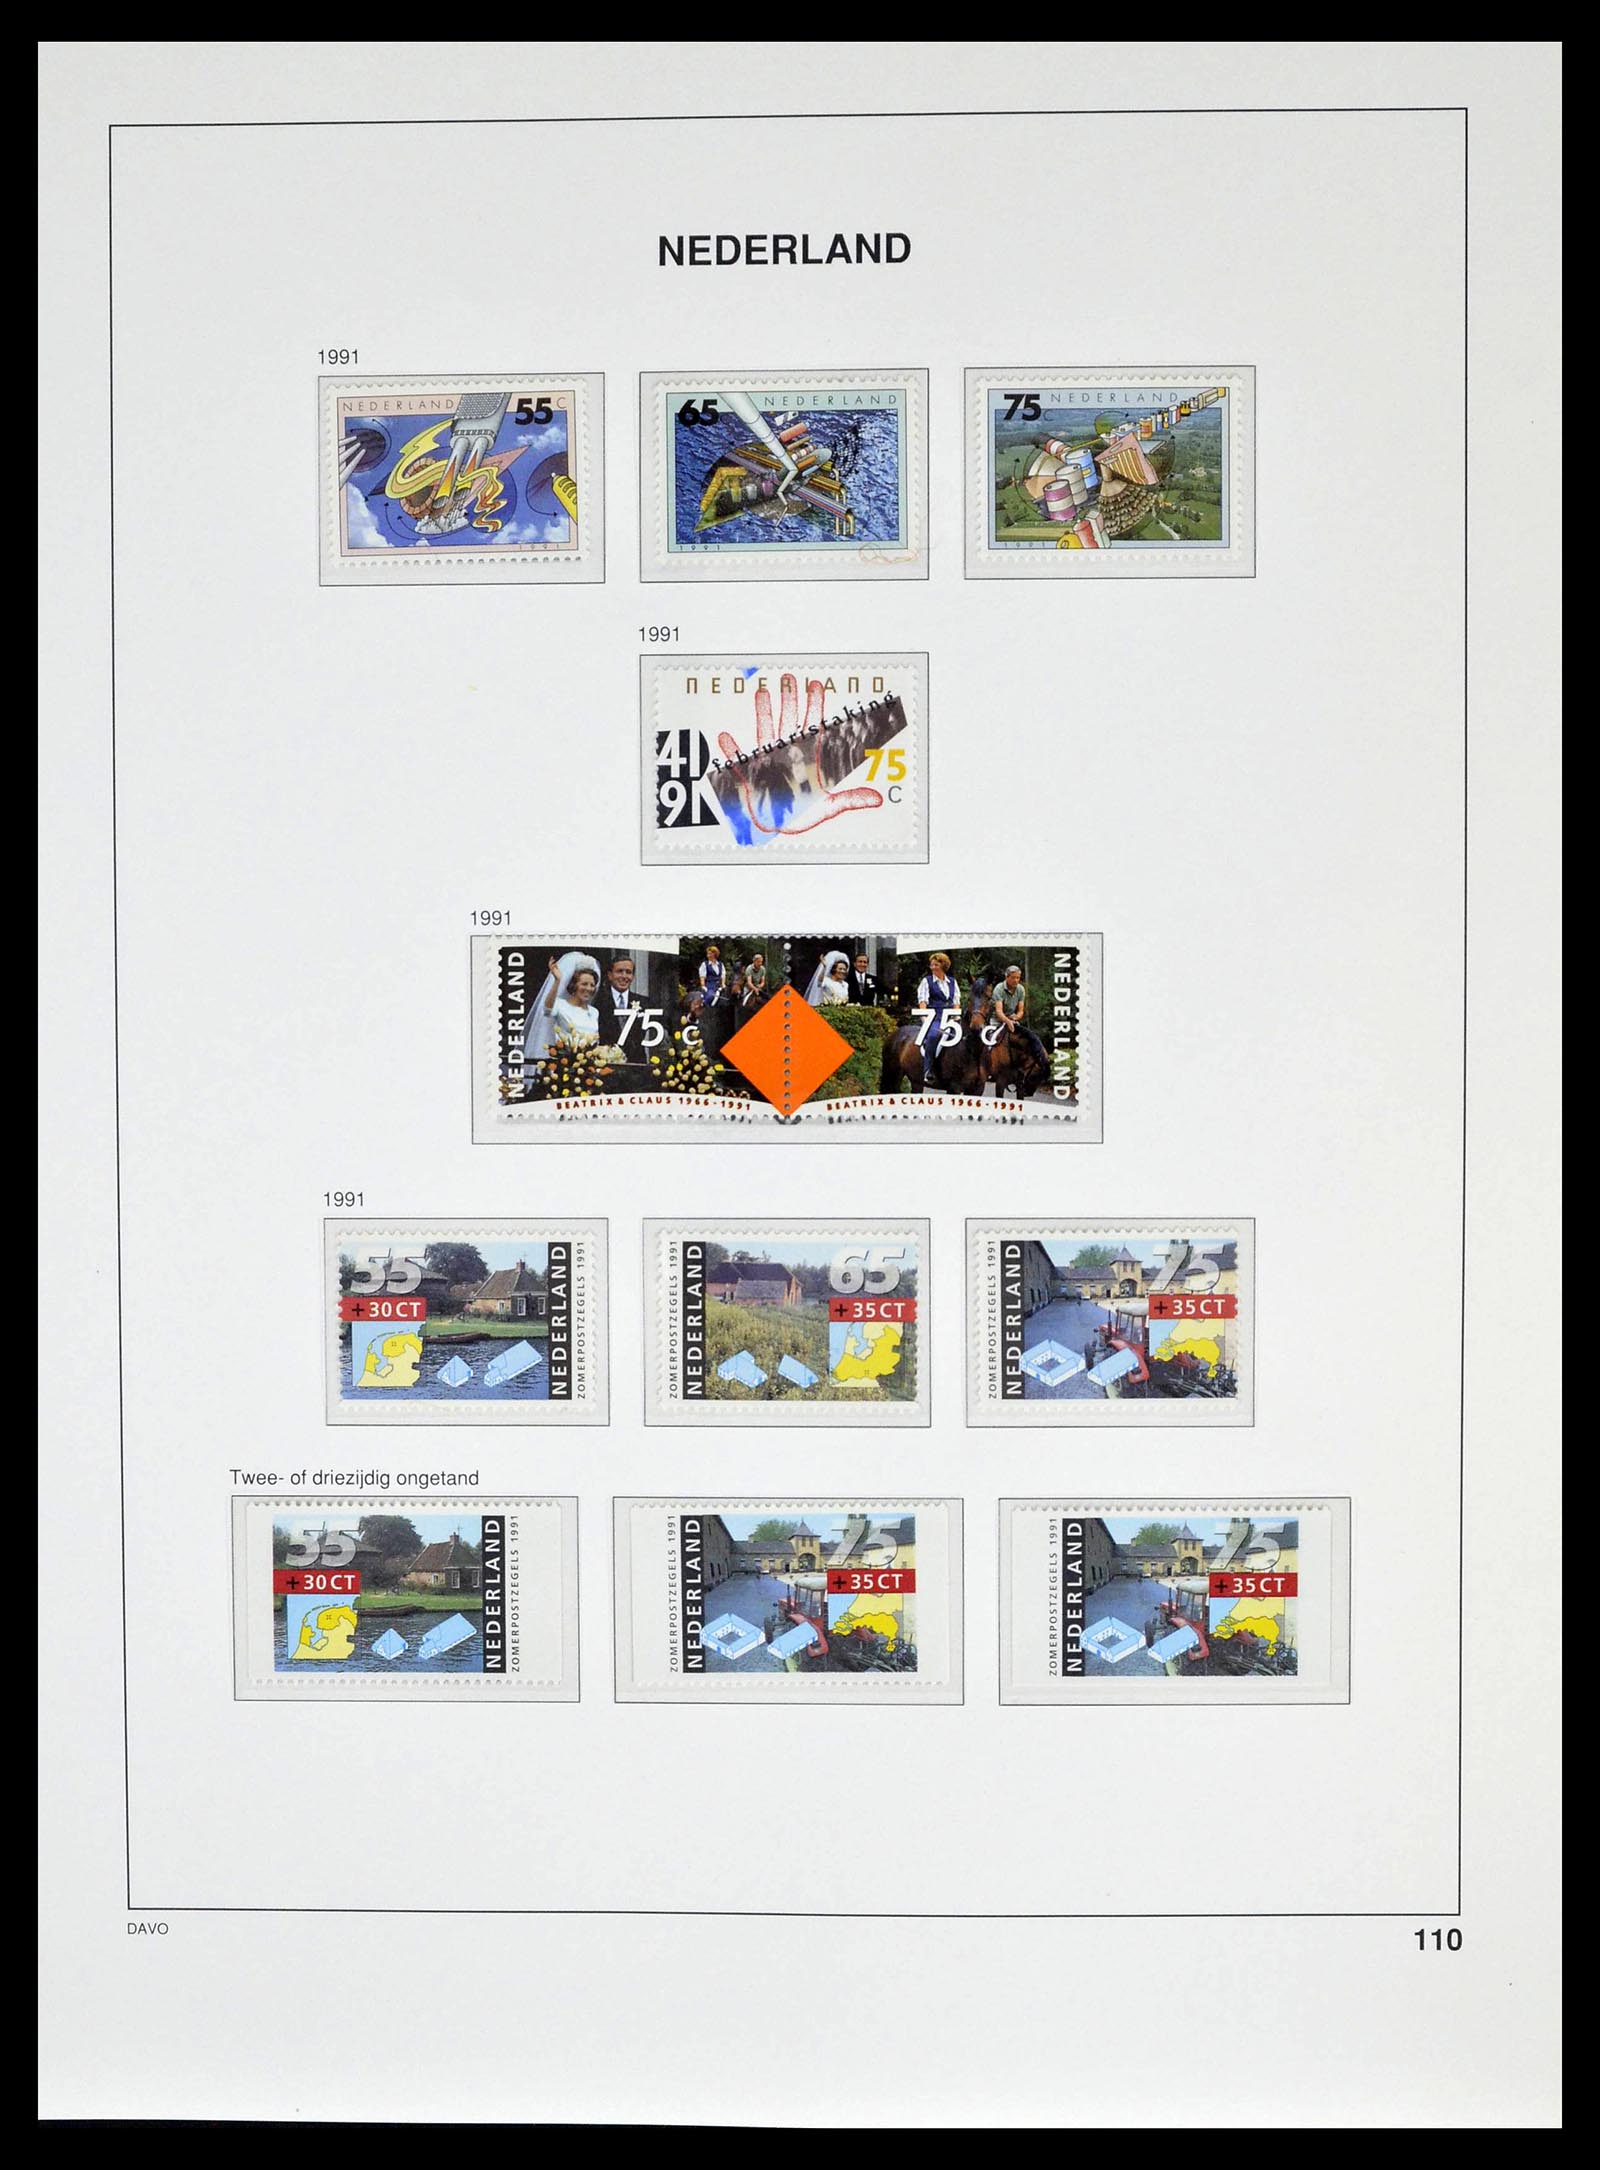 39136 0047 - Stamp collection 39136 Netherlands 1975-2020!